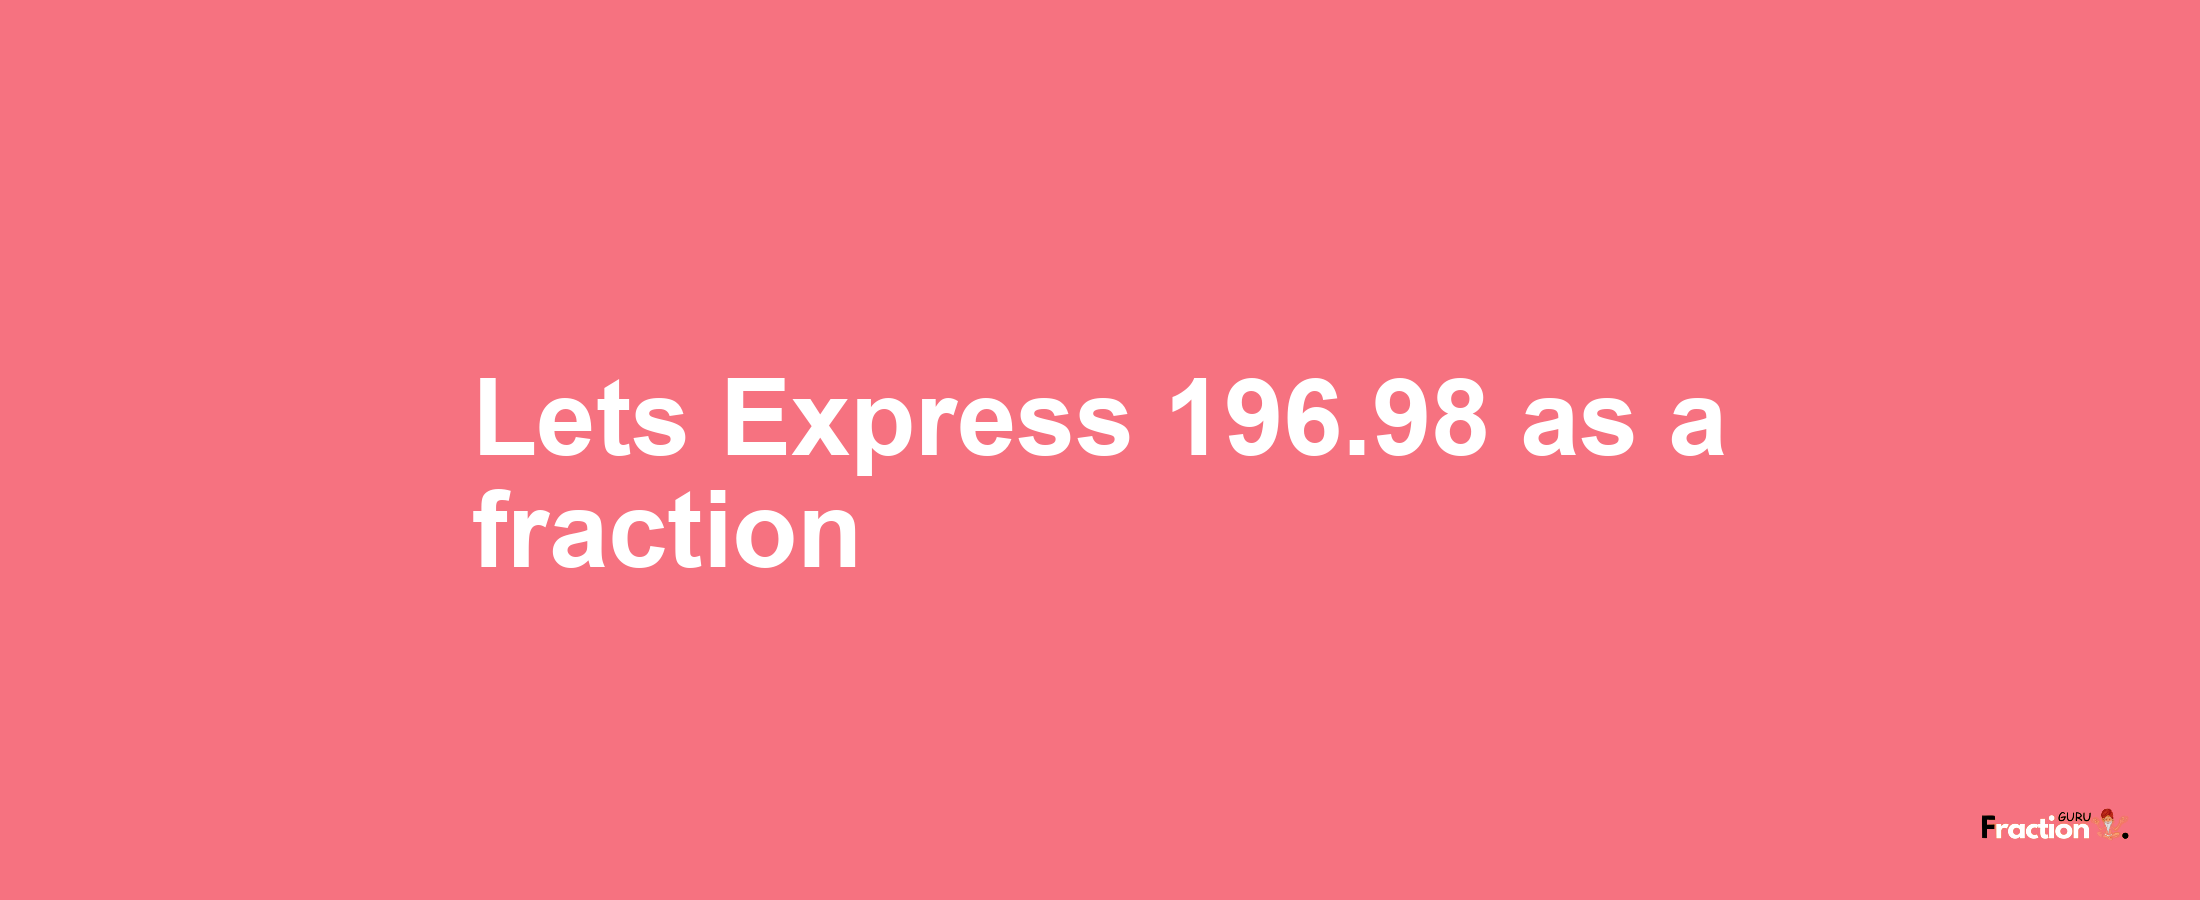 Lets Express 196.98 as afraction